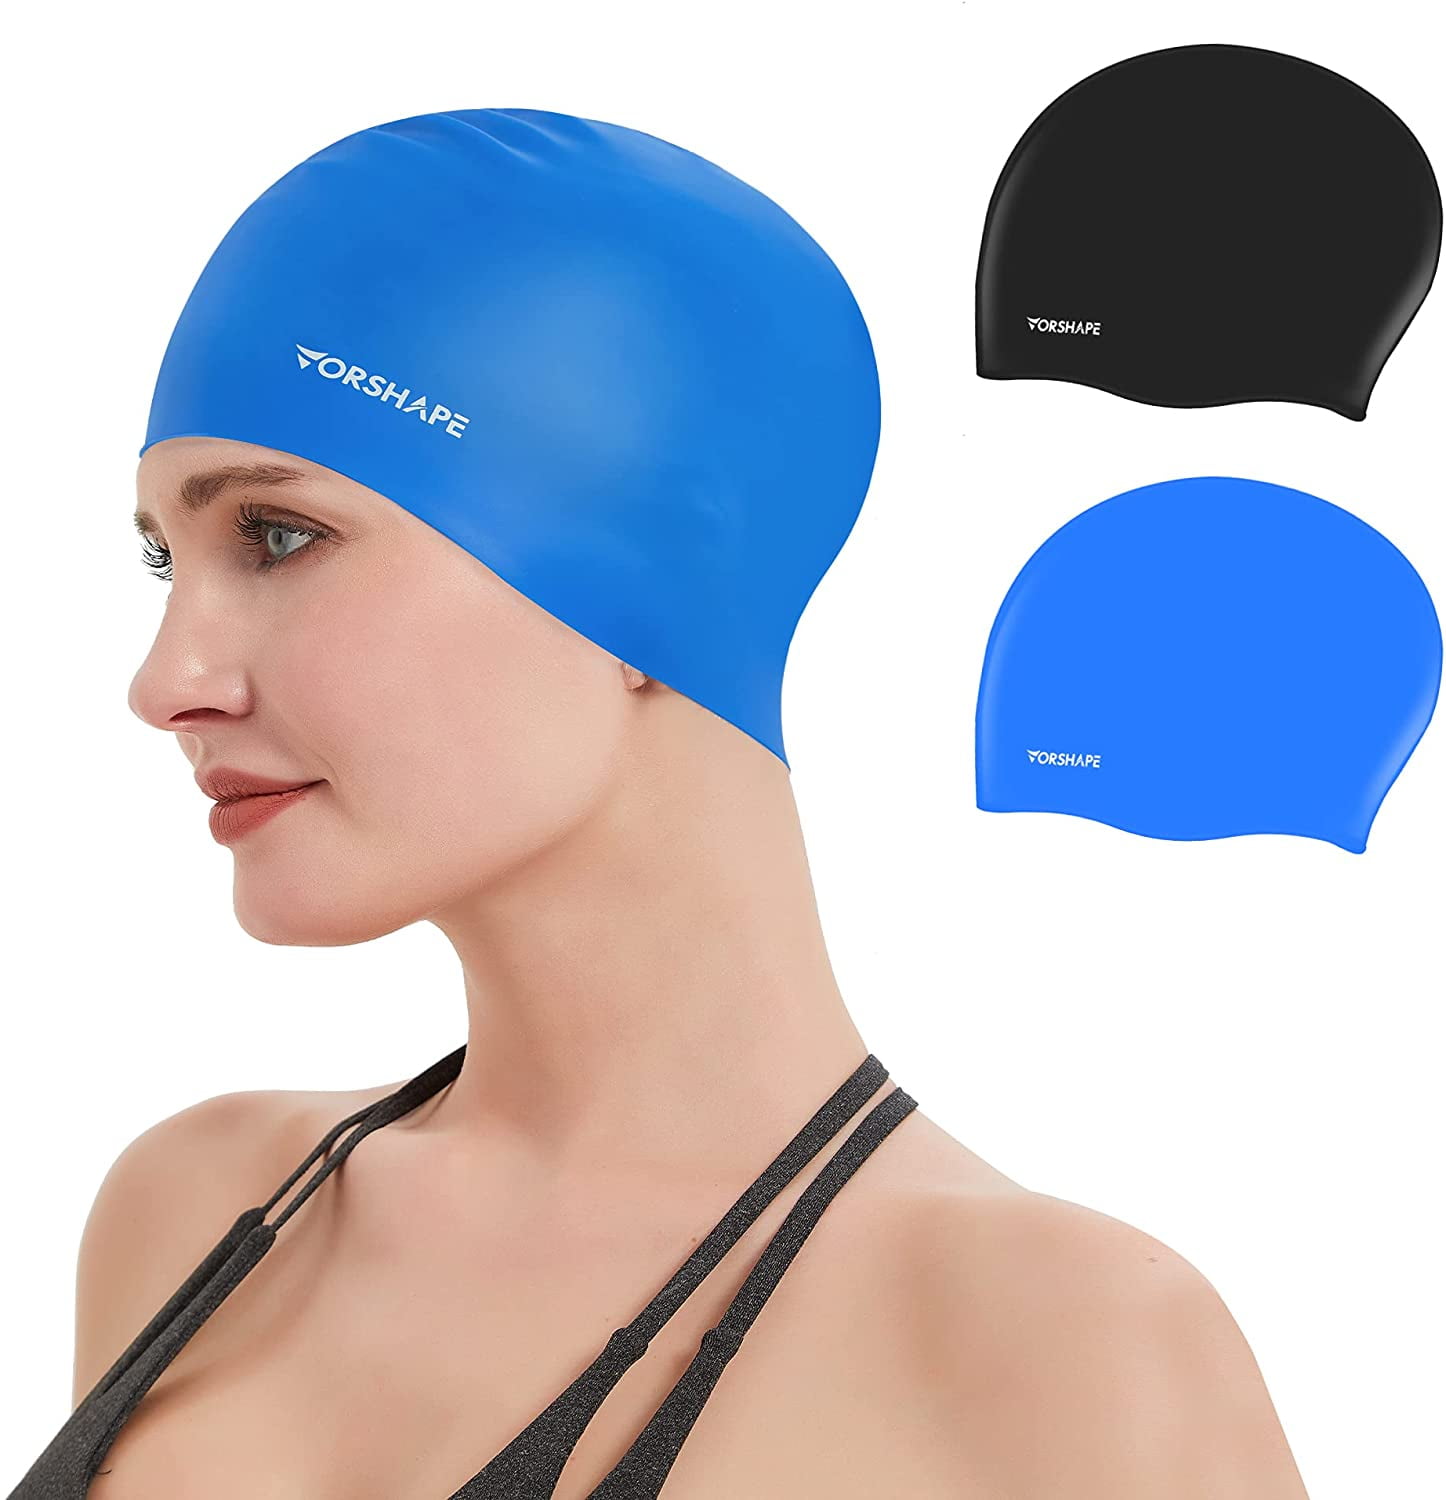 Keary 2 Pack Silicone Swim Cap for Long Hair Women Girls Waterproof Pool Swimming Cap Cover Ears to Keep Your Hair Dry 3D Ergonomic Soft Stretchable Durable and Anti-Slip Easy to Put On and Off 